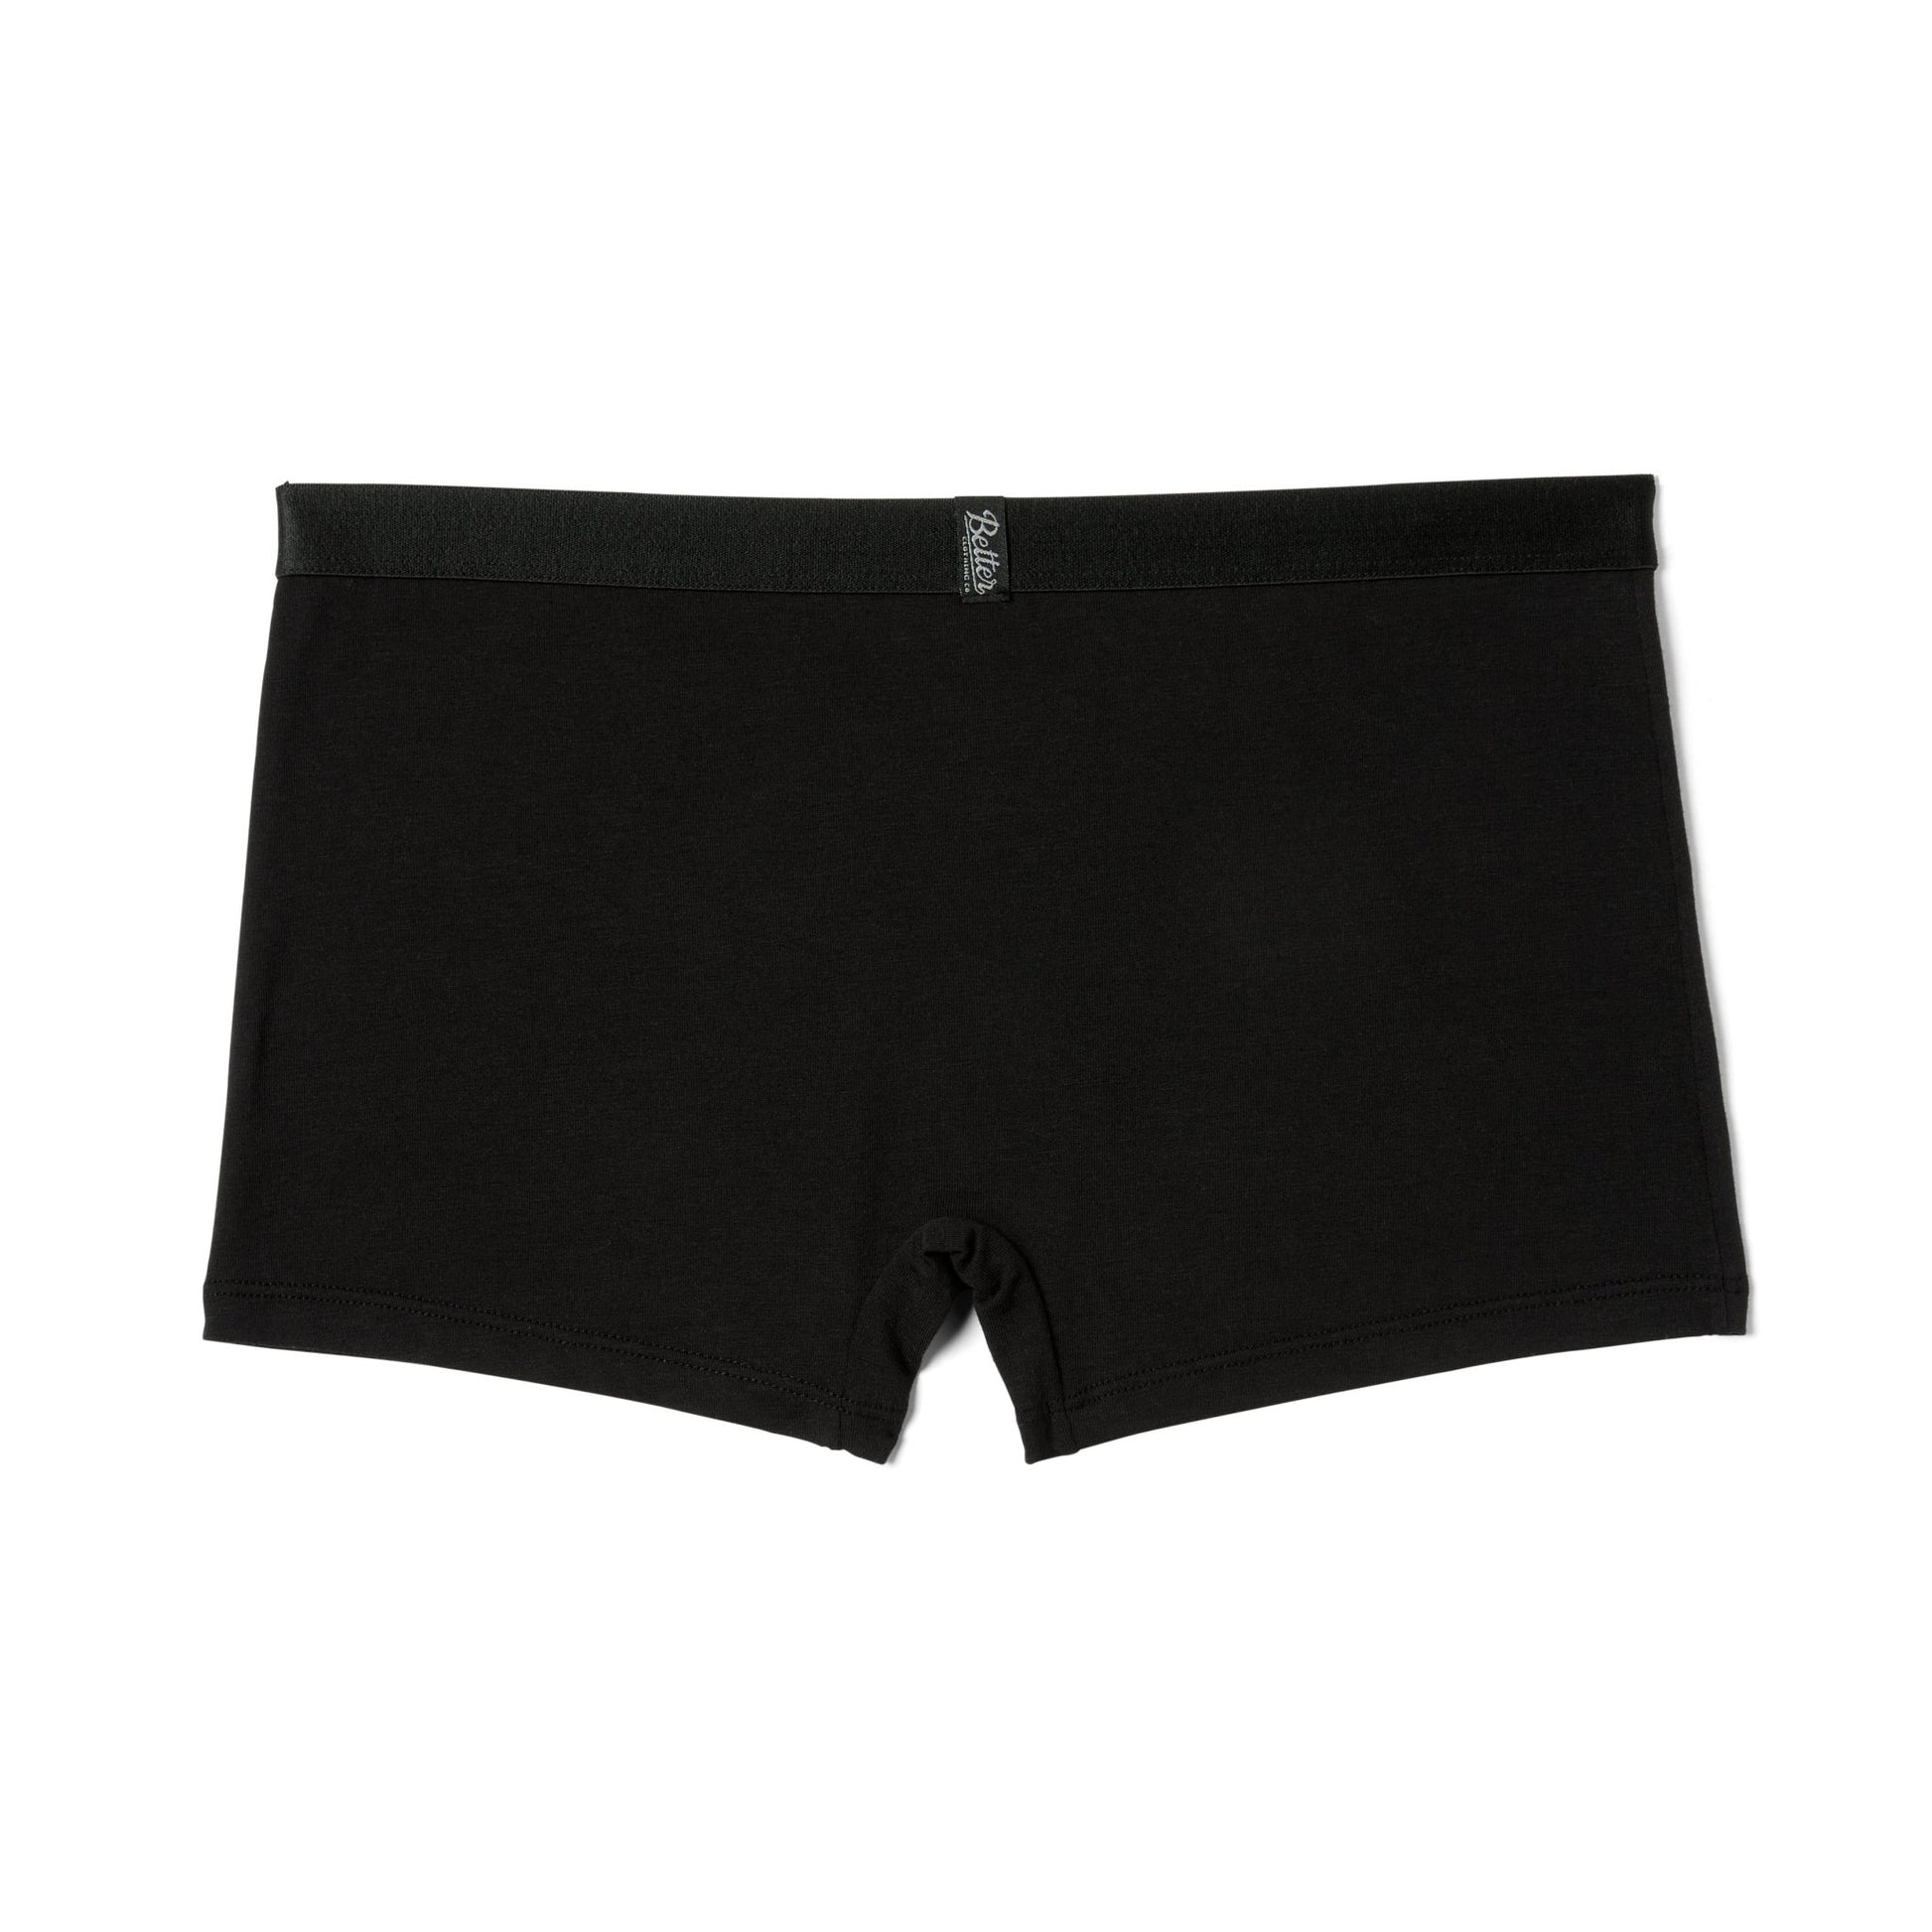 A comfortable Better Cotton Boyshort with an elastic waistband by Better Clothing Company.